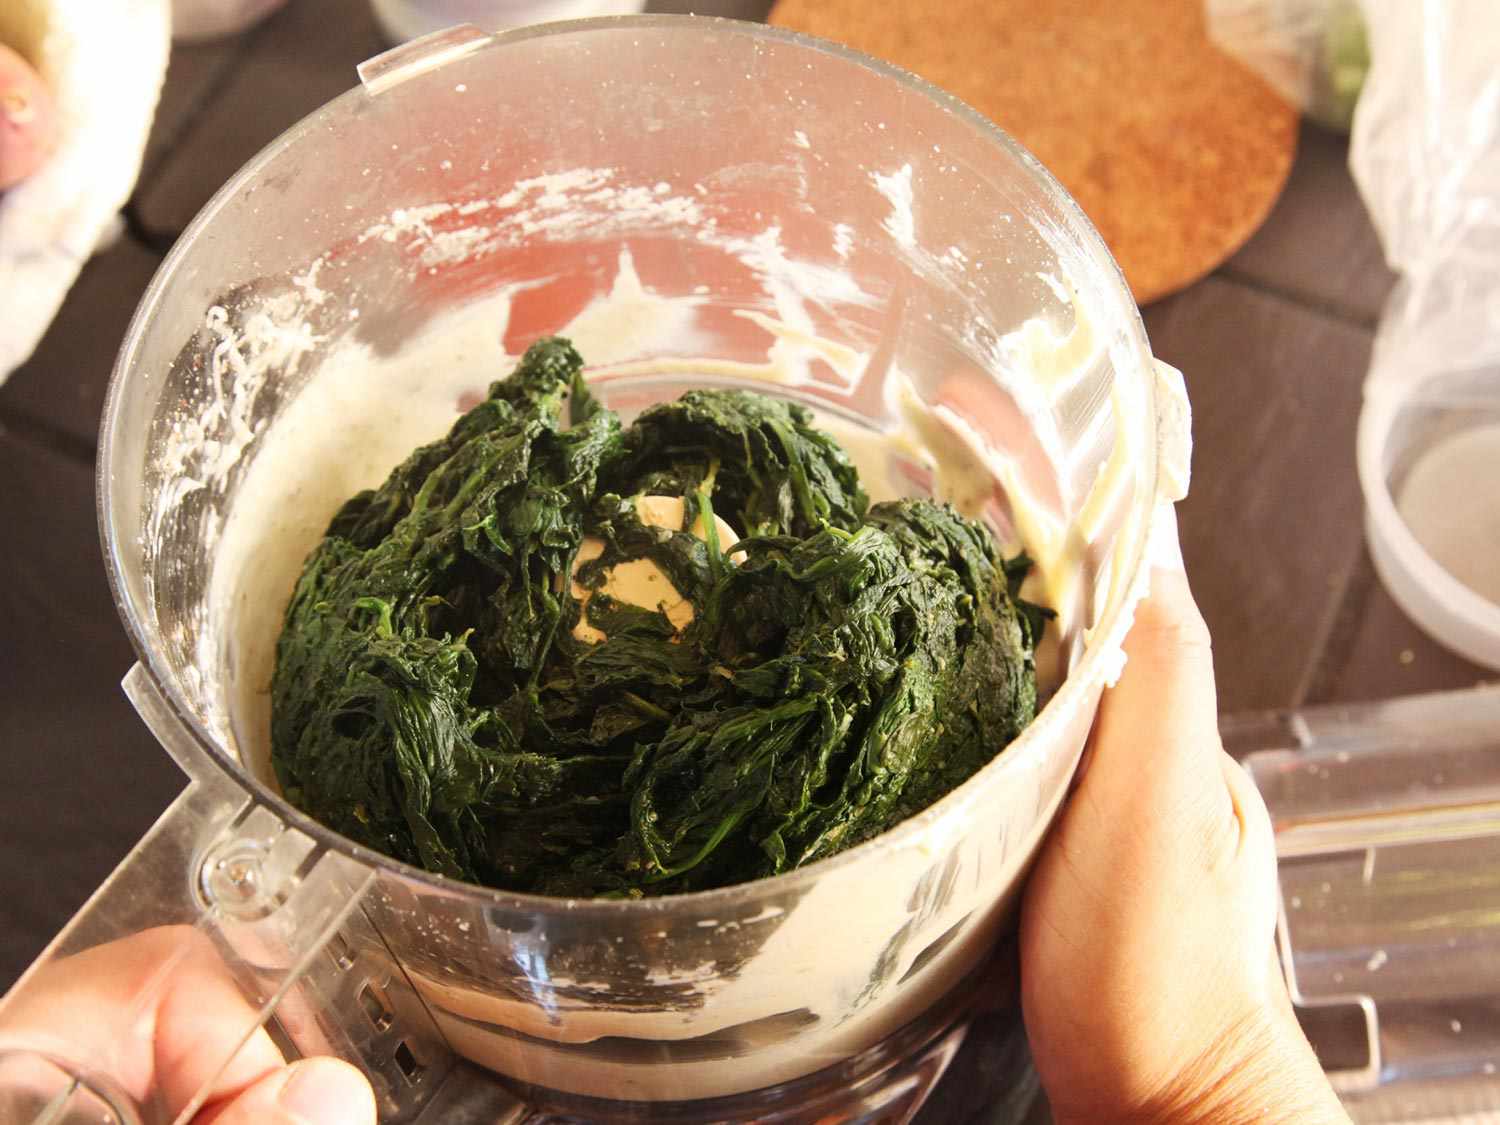 Sauteed spinach chopped in a food processor